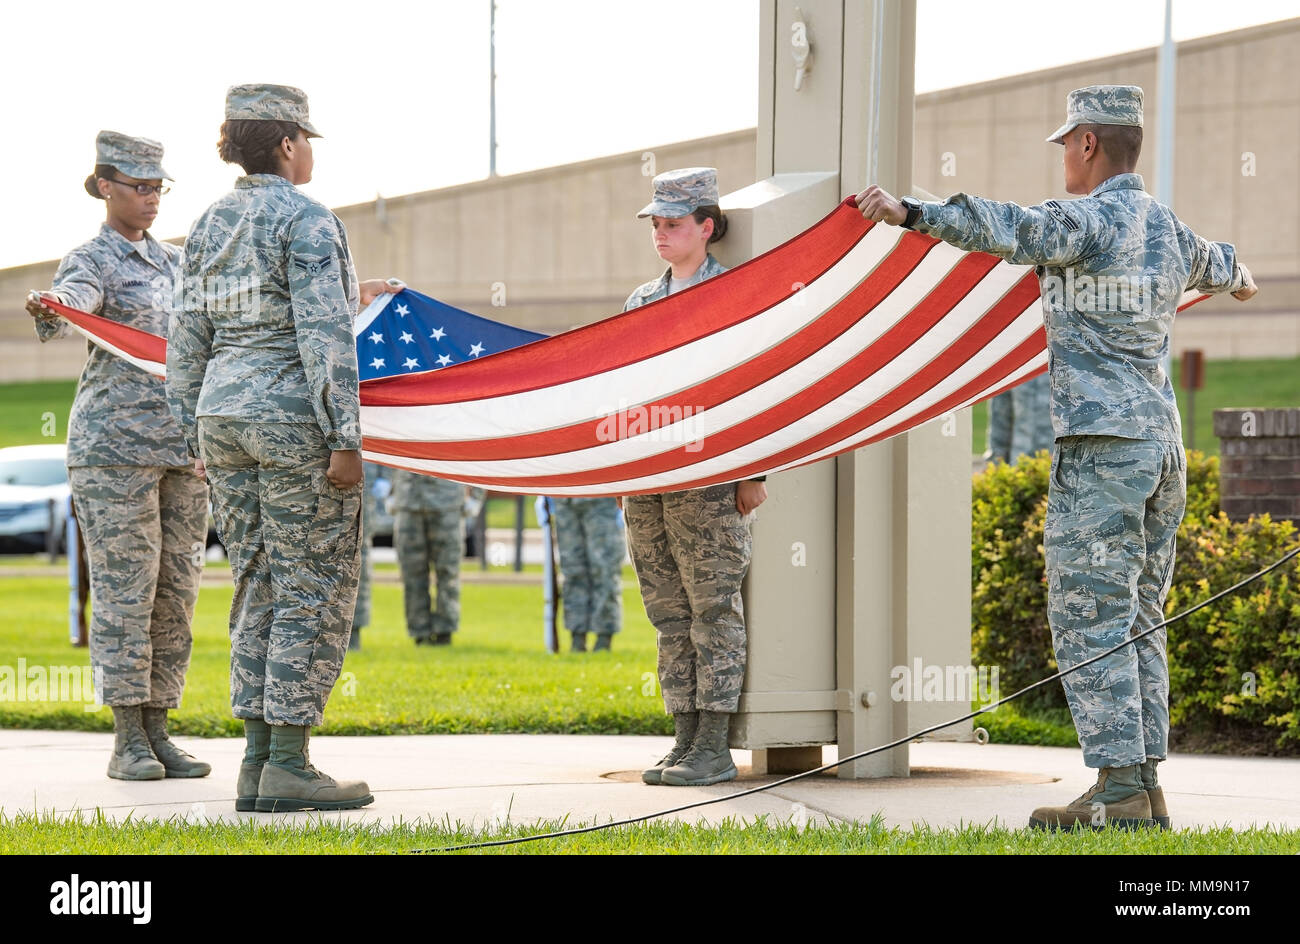 Members of the Dover Air Force Base Honor Guard prepare to fold the U.S. flag during the National Prisoner of War and Missing in Action Recognition Day ceremony Sept. 15, 2017, on Dover Air Force Base, Del. Positioned left to right, Senior Airman Kiara Hammett, 436th Aerospace Medical Squadron; Airman 1st Class Clair Boyles, 436th Logistics Readiness Squadron; Airman 1st Class Jessica Shaffer, 436th Operations Support Squadron; and Senior Airman Edcyril Mallonga, 436th Civil Engineer Squadron; presented the folded flag to Col. Corey Simmons, 436th Airlift Wing vice commander. (U.S. Air Force p Stock Photo